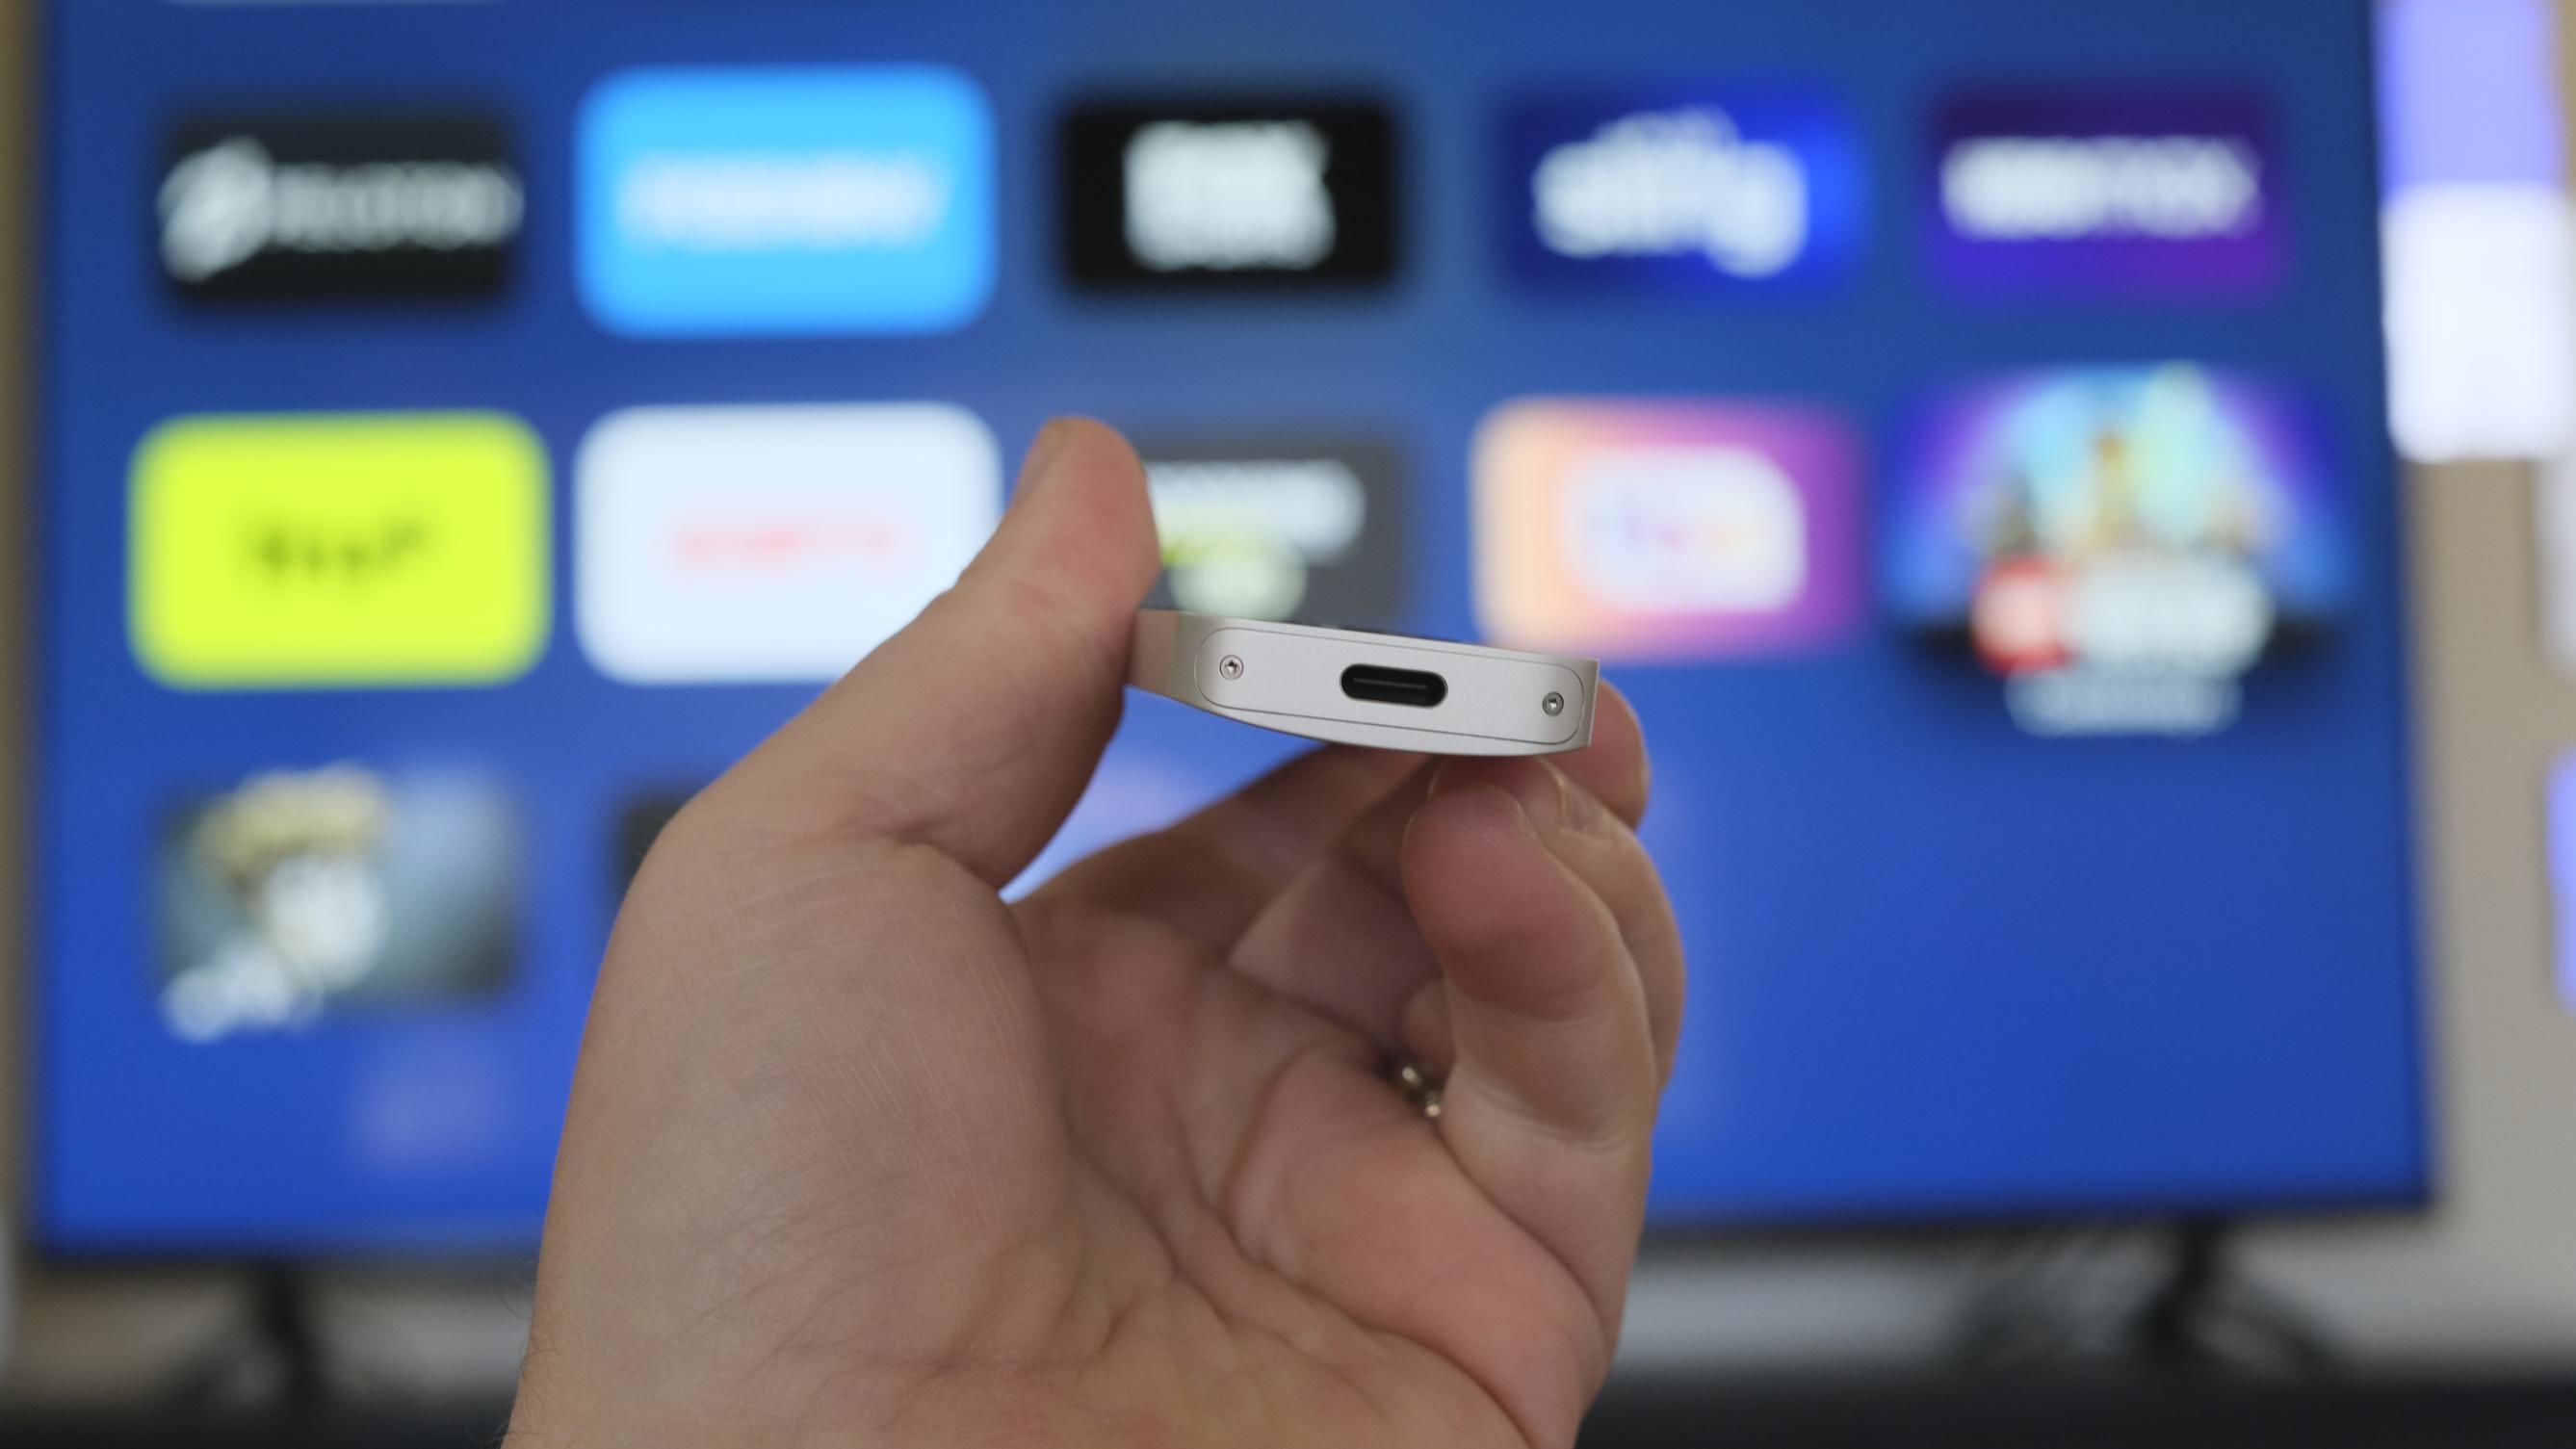 Apple TV 4K (2022) review: built for the future